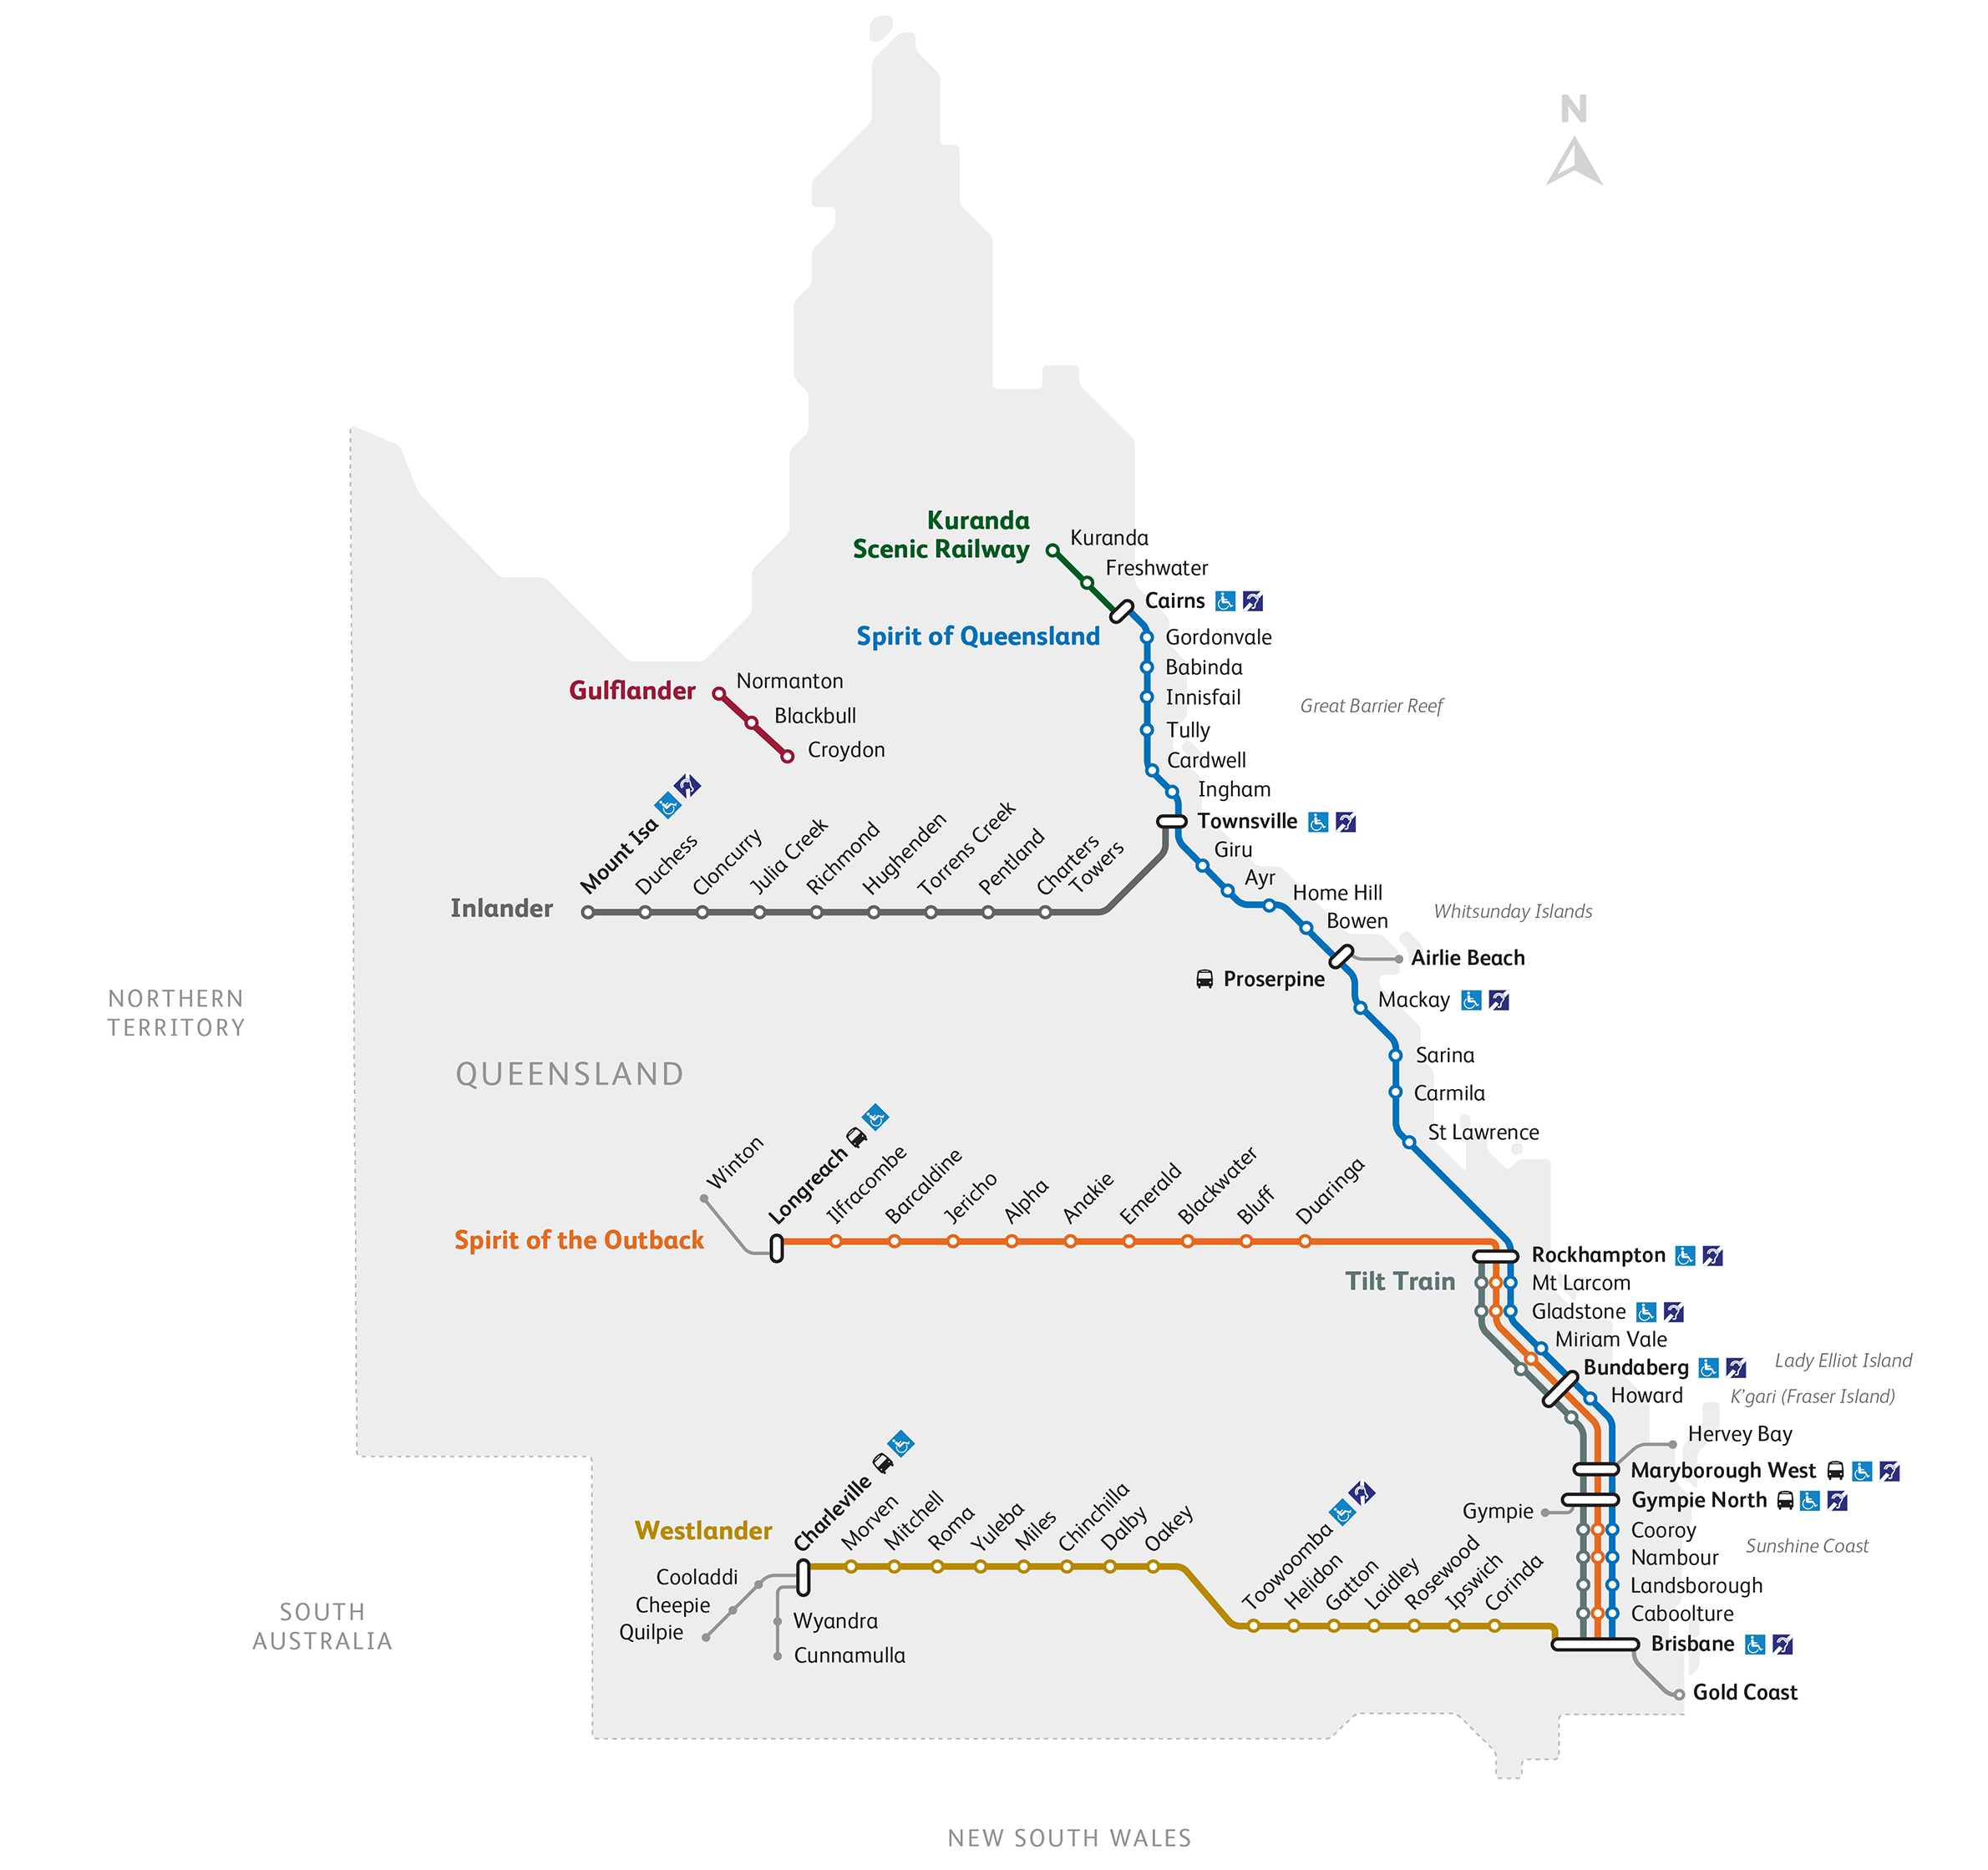 Image of the Queensland Rail Travel rail network showing the routes of the long-distance services and tourist trains.